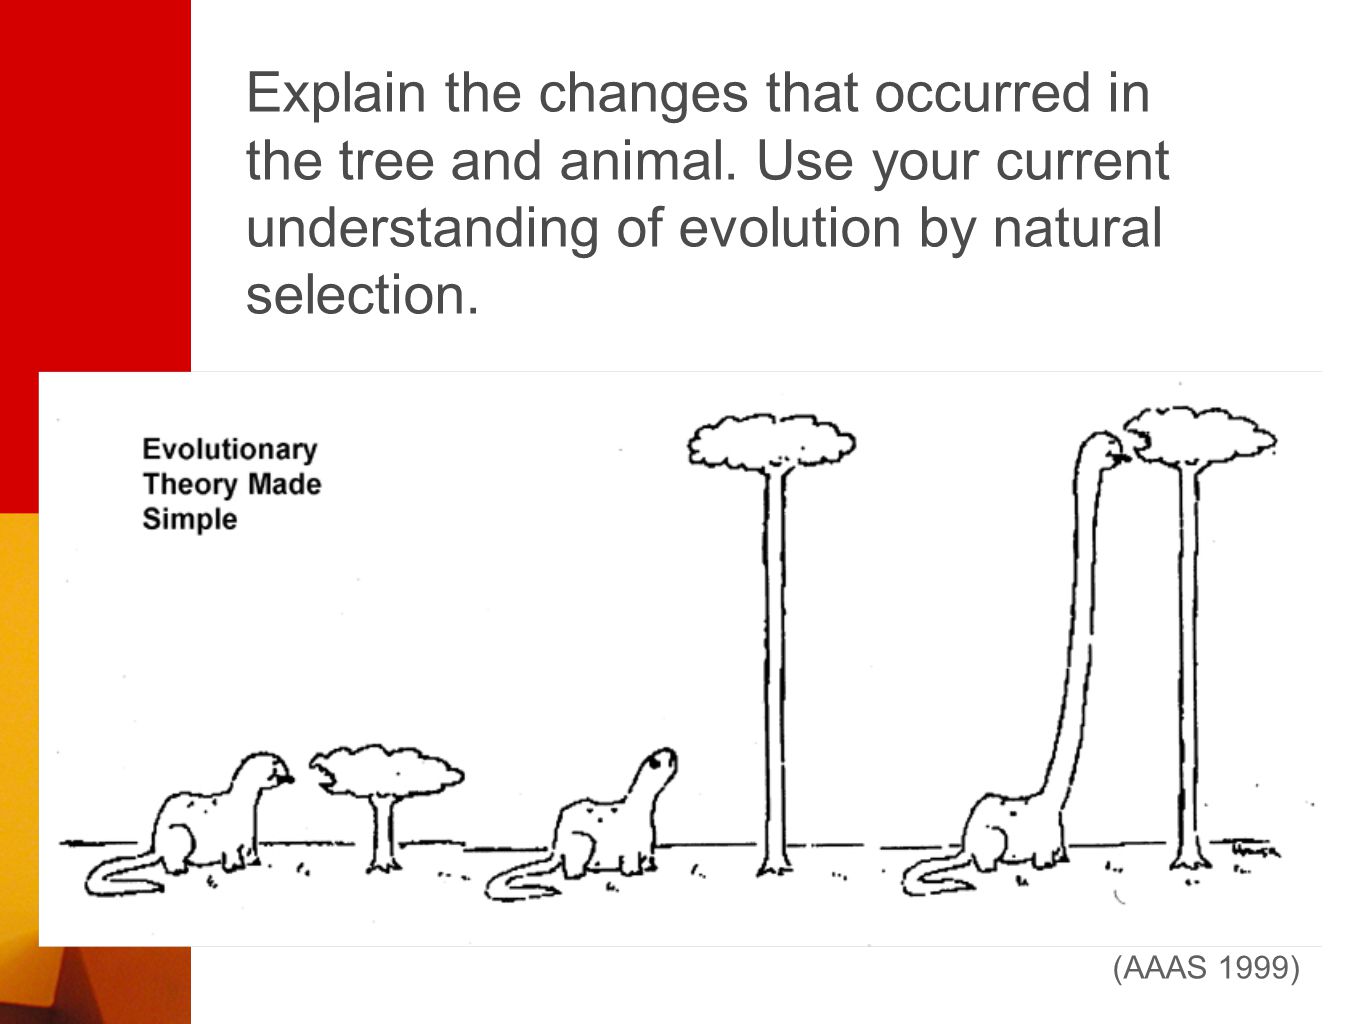 (AAAS 1999) Explain the changes that occurred in the tree and animal.